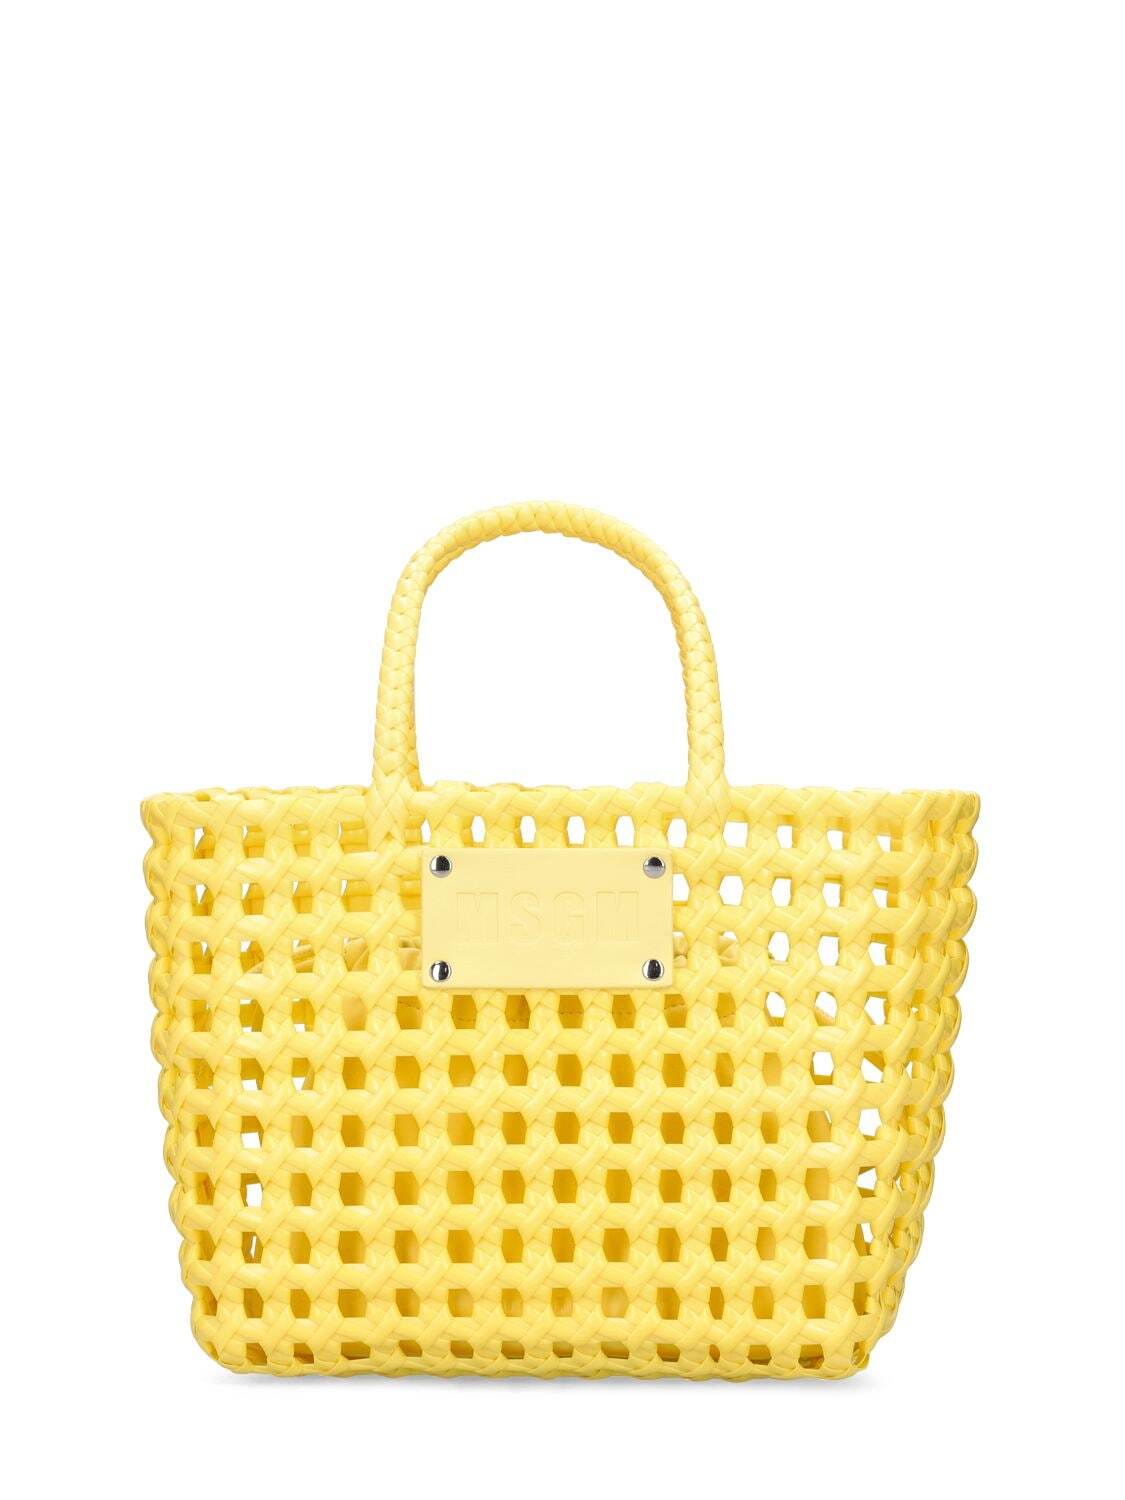 MSGM Logo Braided Top Handle Bag in yellow